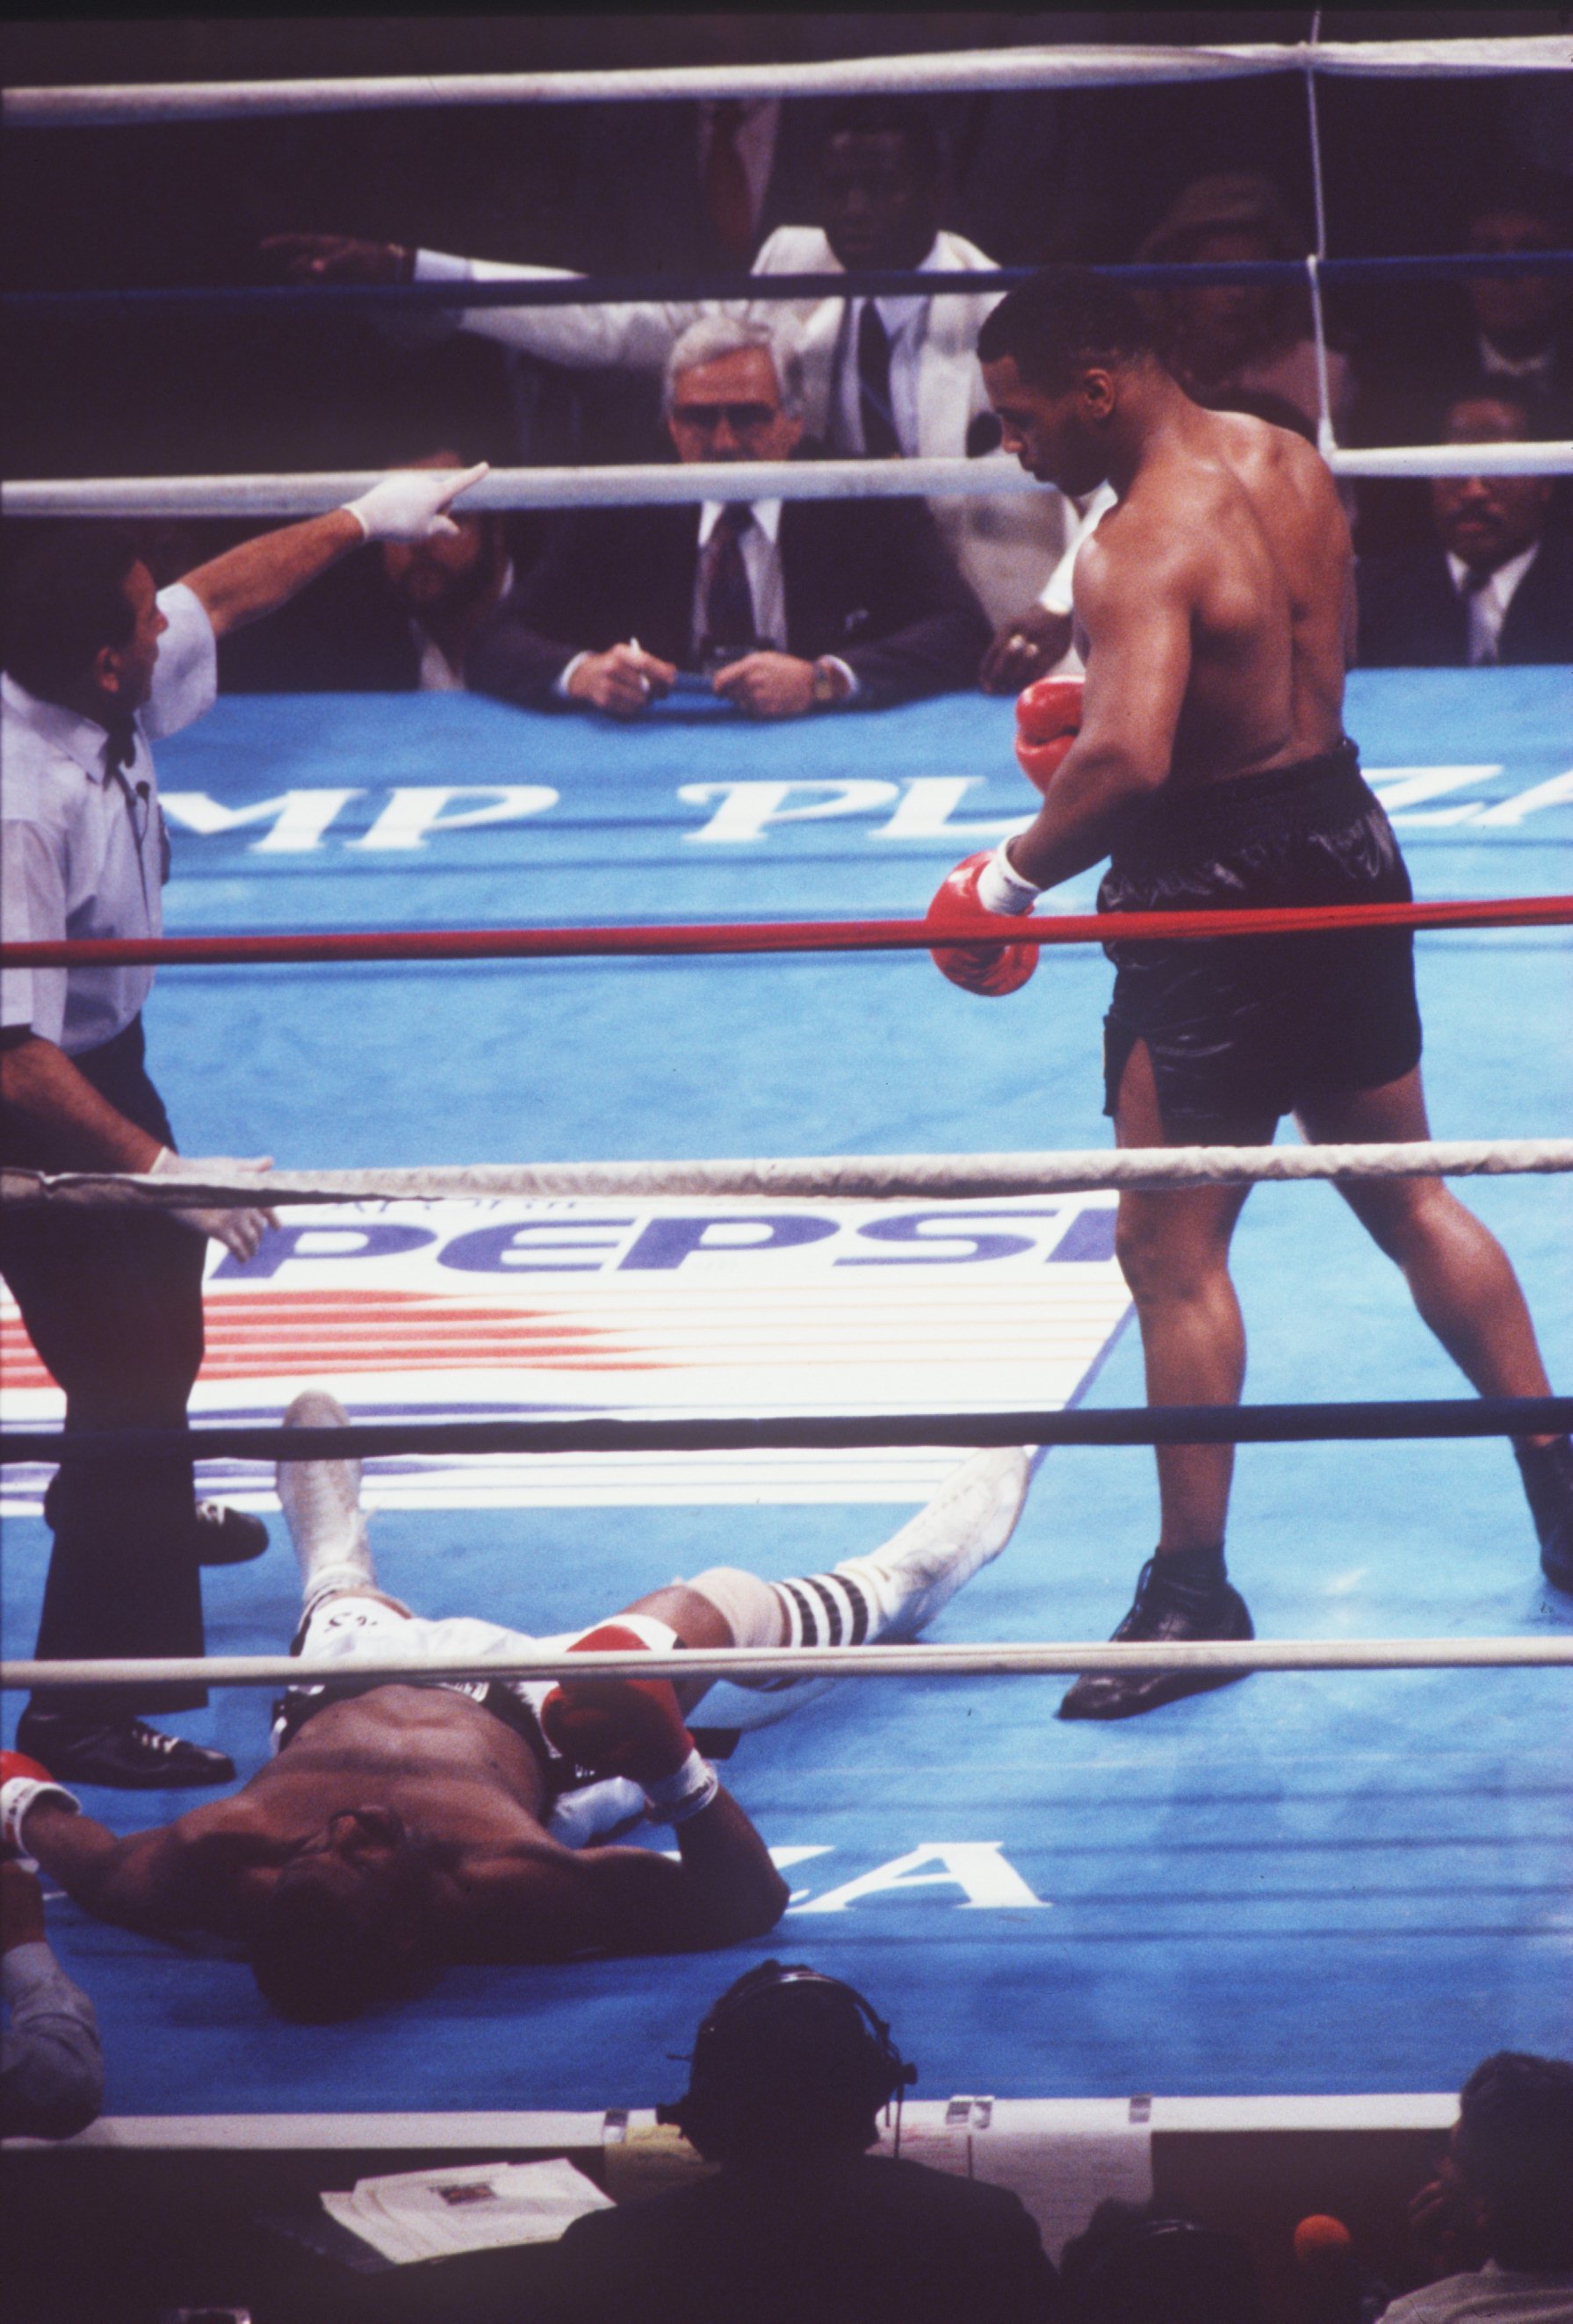 27 JUN 1988:  MIKE TYSON IS SENT TO A NEUTRAL CORNER AFTER PUTTING MICHAEL SPINKS ON THE CANVAS DURING THEIR WORLD HEAVYWEIGHT CHAMPIONSHIP FIGHT IN ATLANTIC CITY. TYSON REMAINED UNDISPUTED CHAMPION AFTER WINNING THE FIGHT WITH A 1ST ROUND KNOCK OUT. Mand